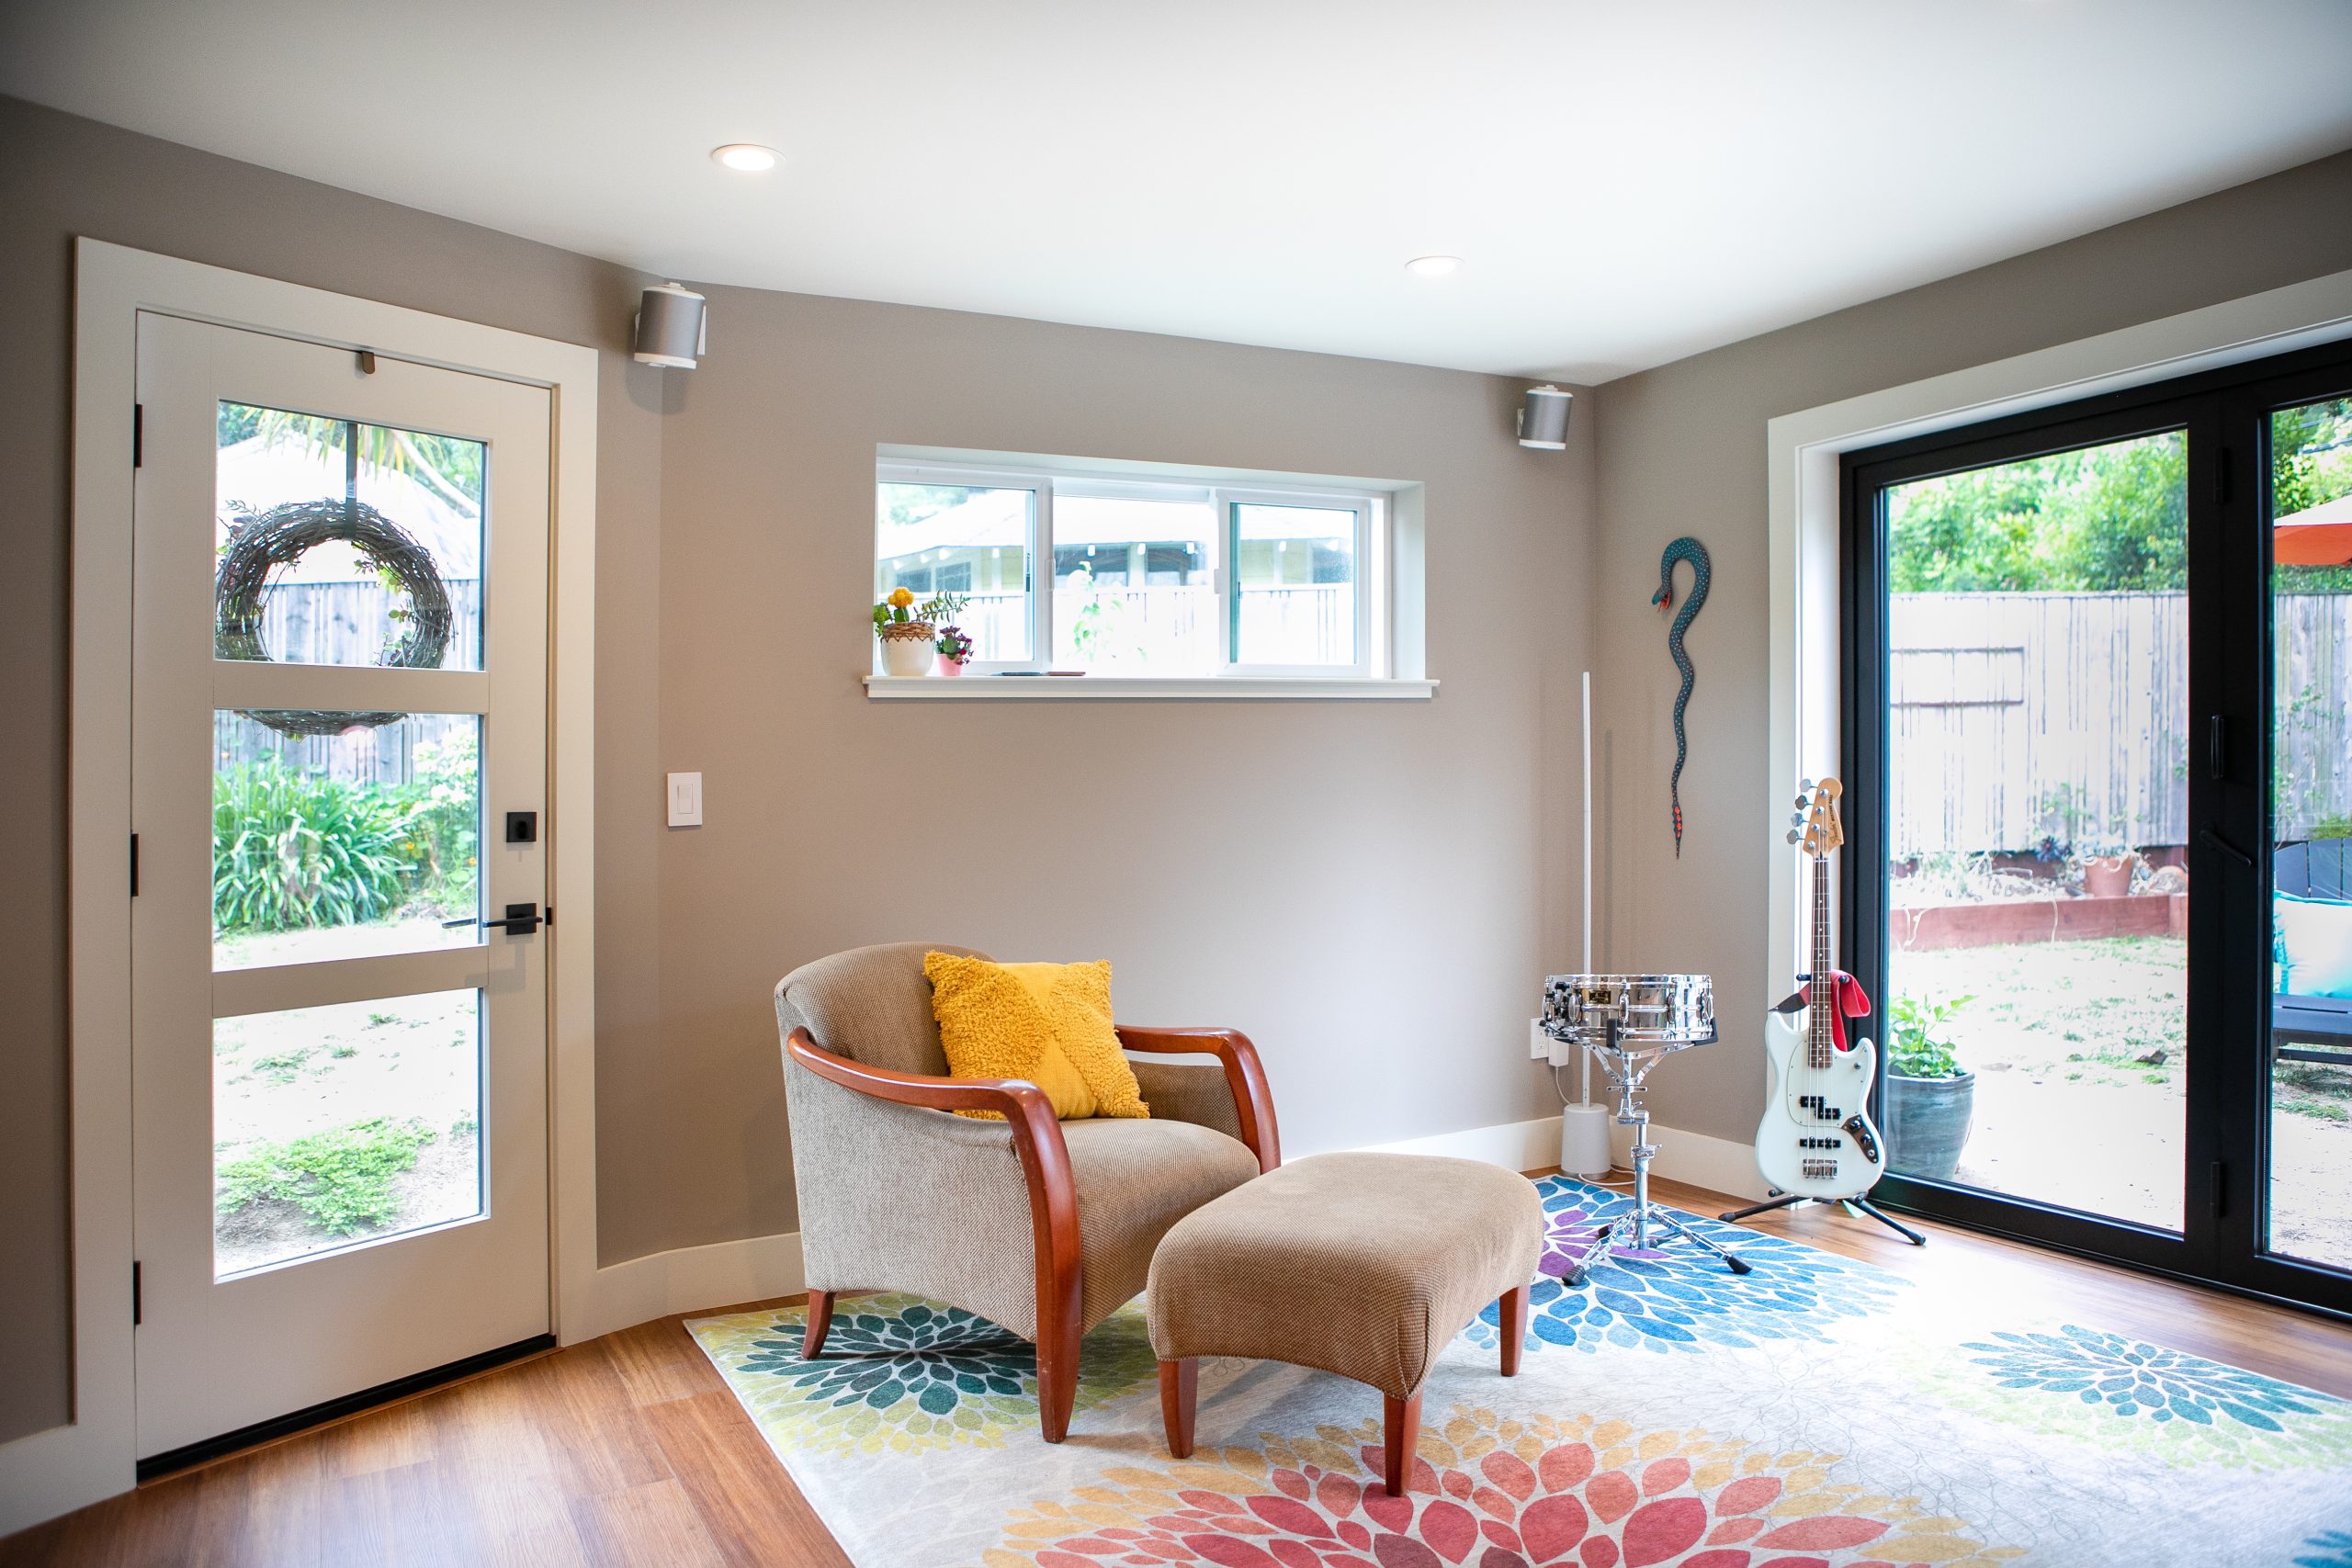 Home remodeling project from Matthew Kelly Construction in San Francisco